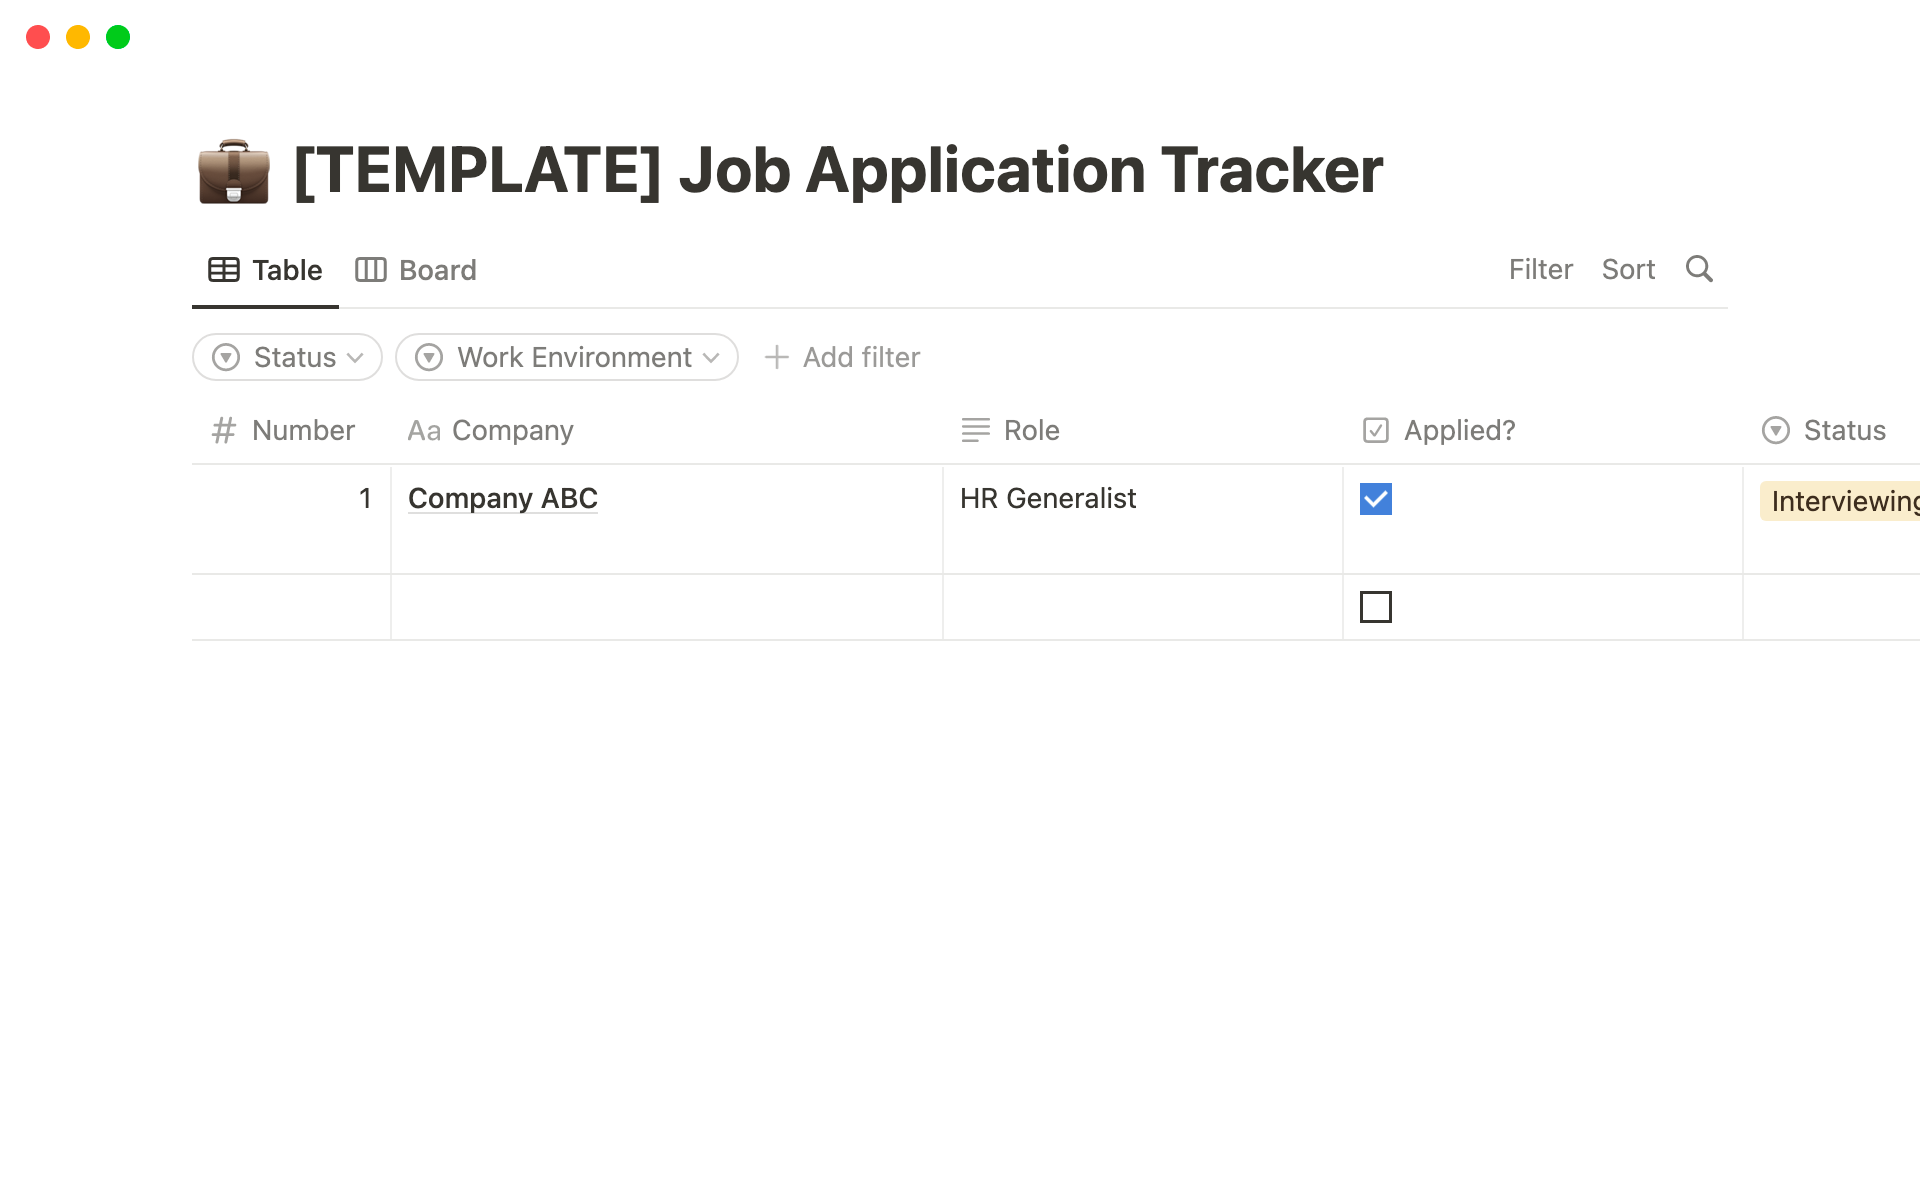 Helps you keep track of your job applications